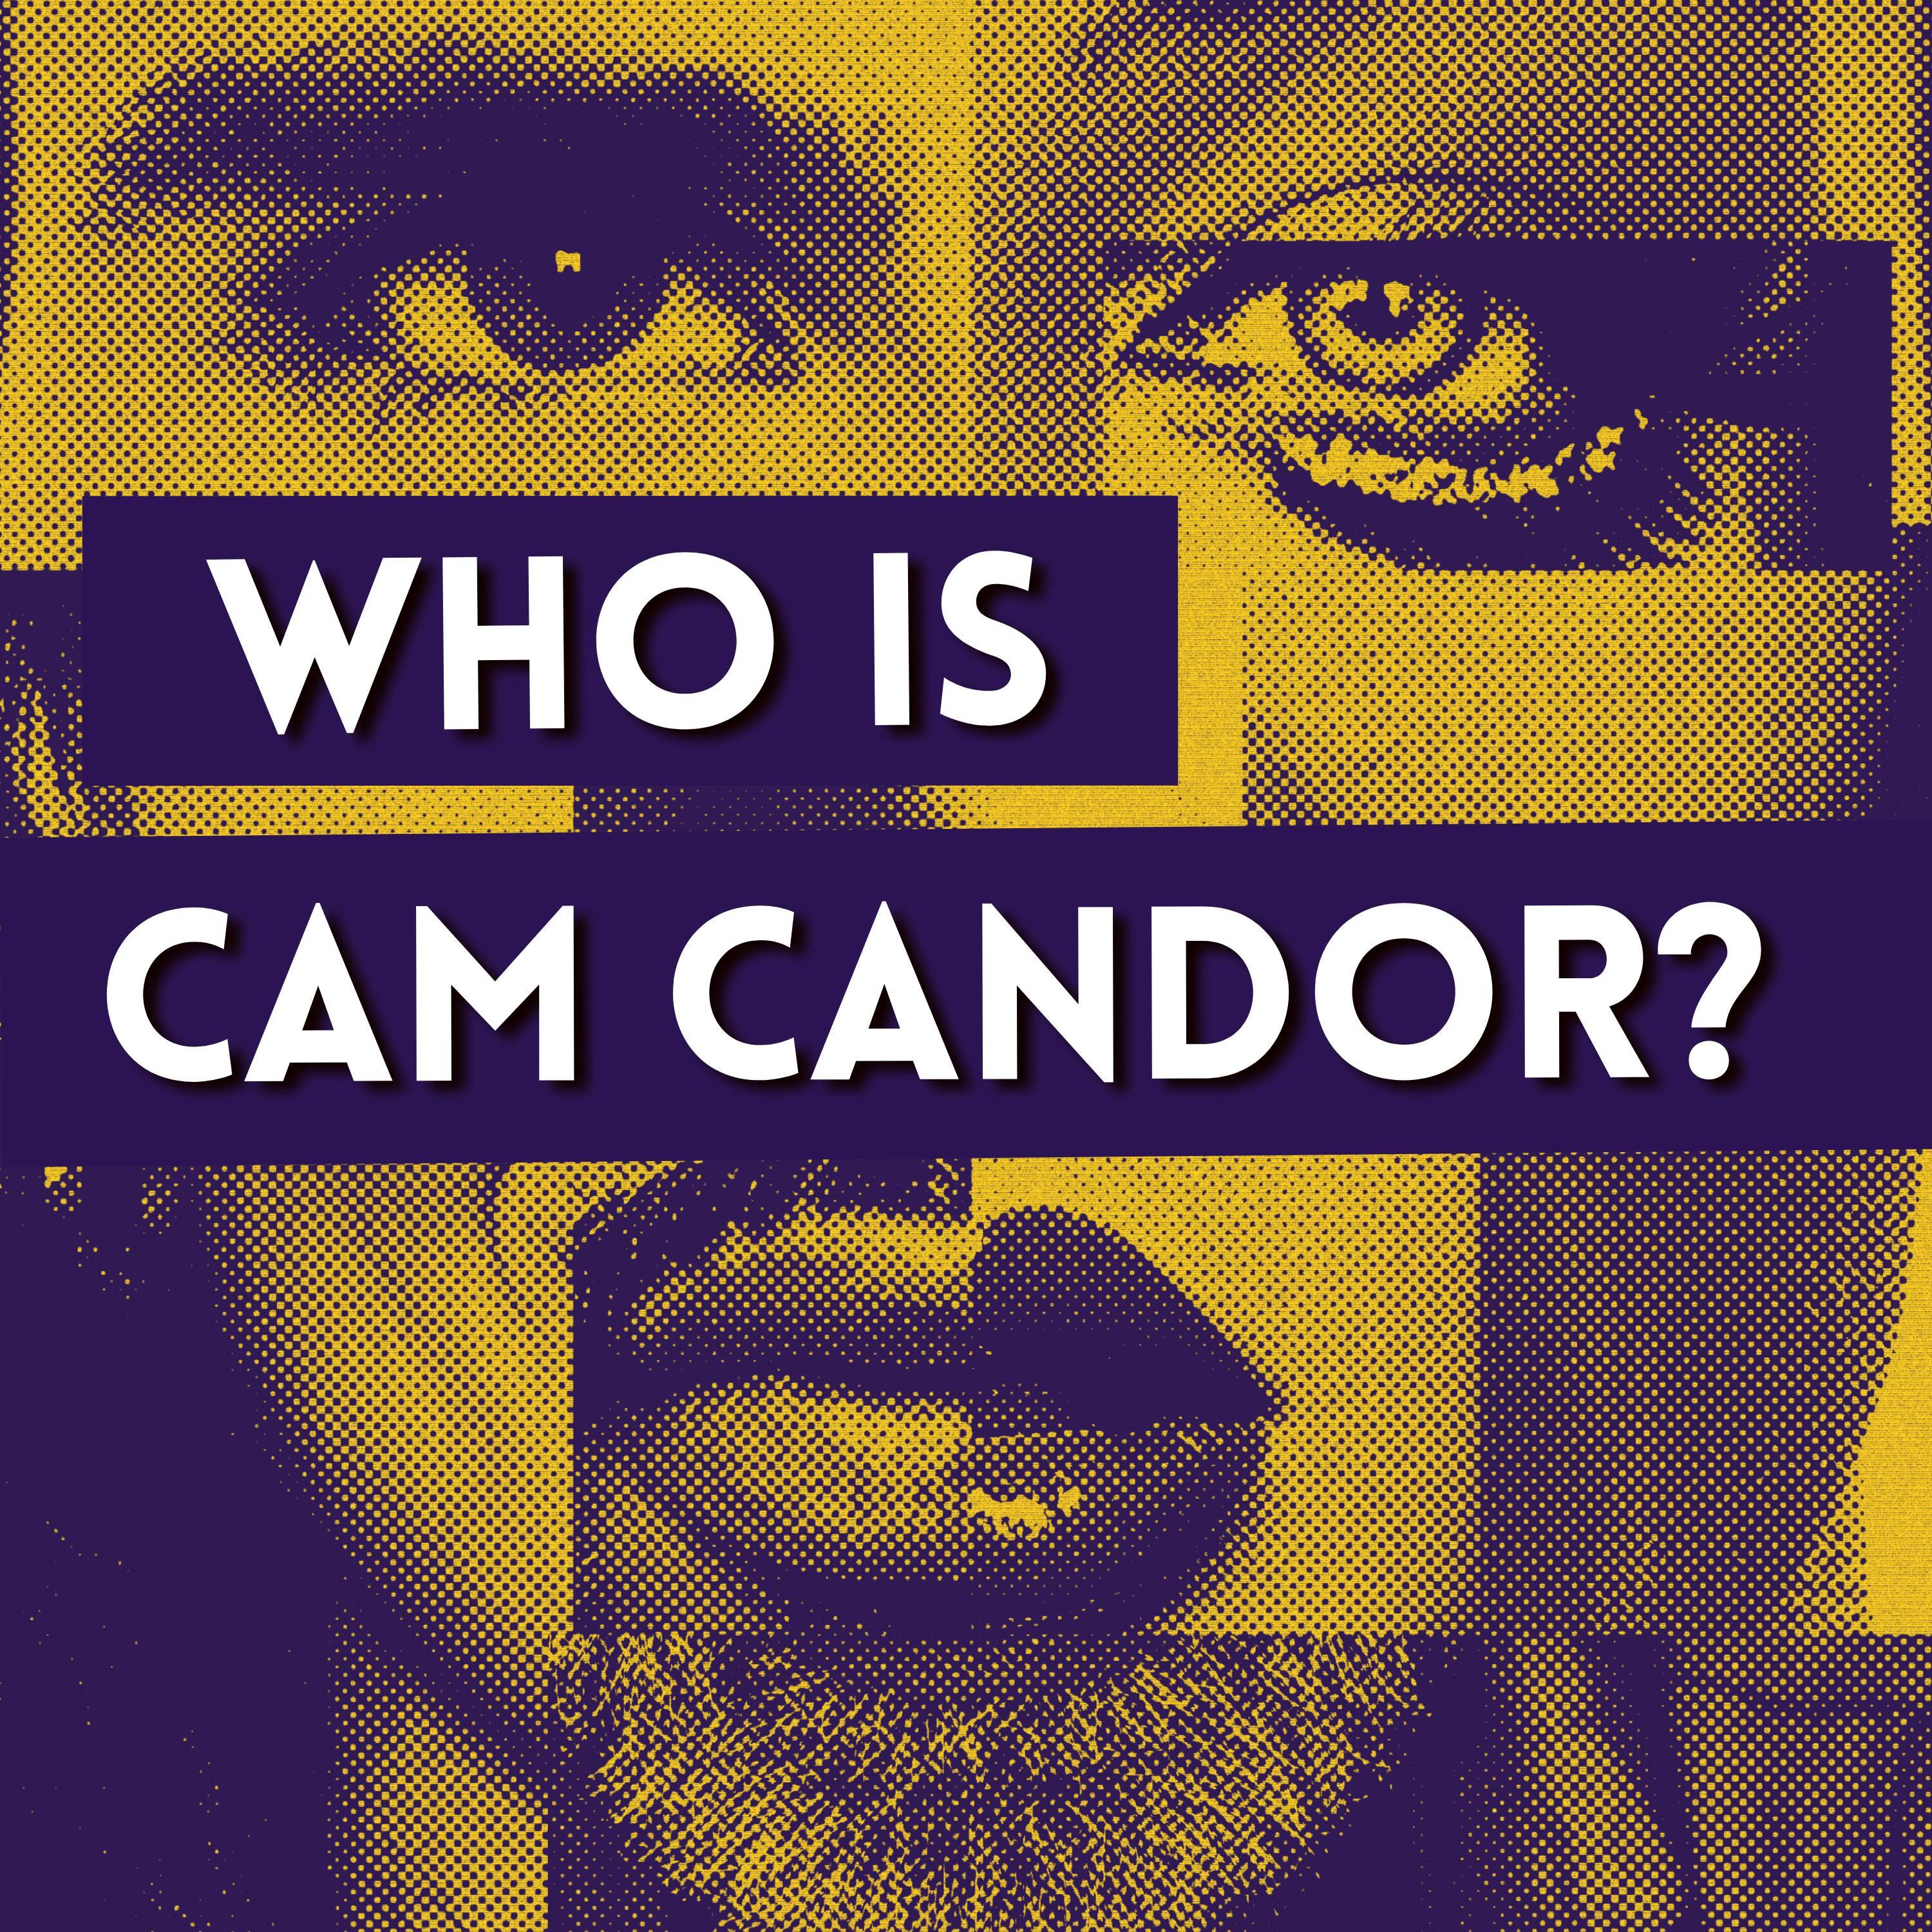 Presenting: Who is Cam Candor? -- 